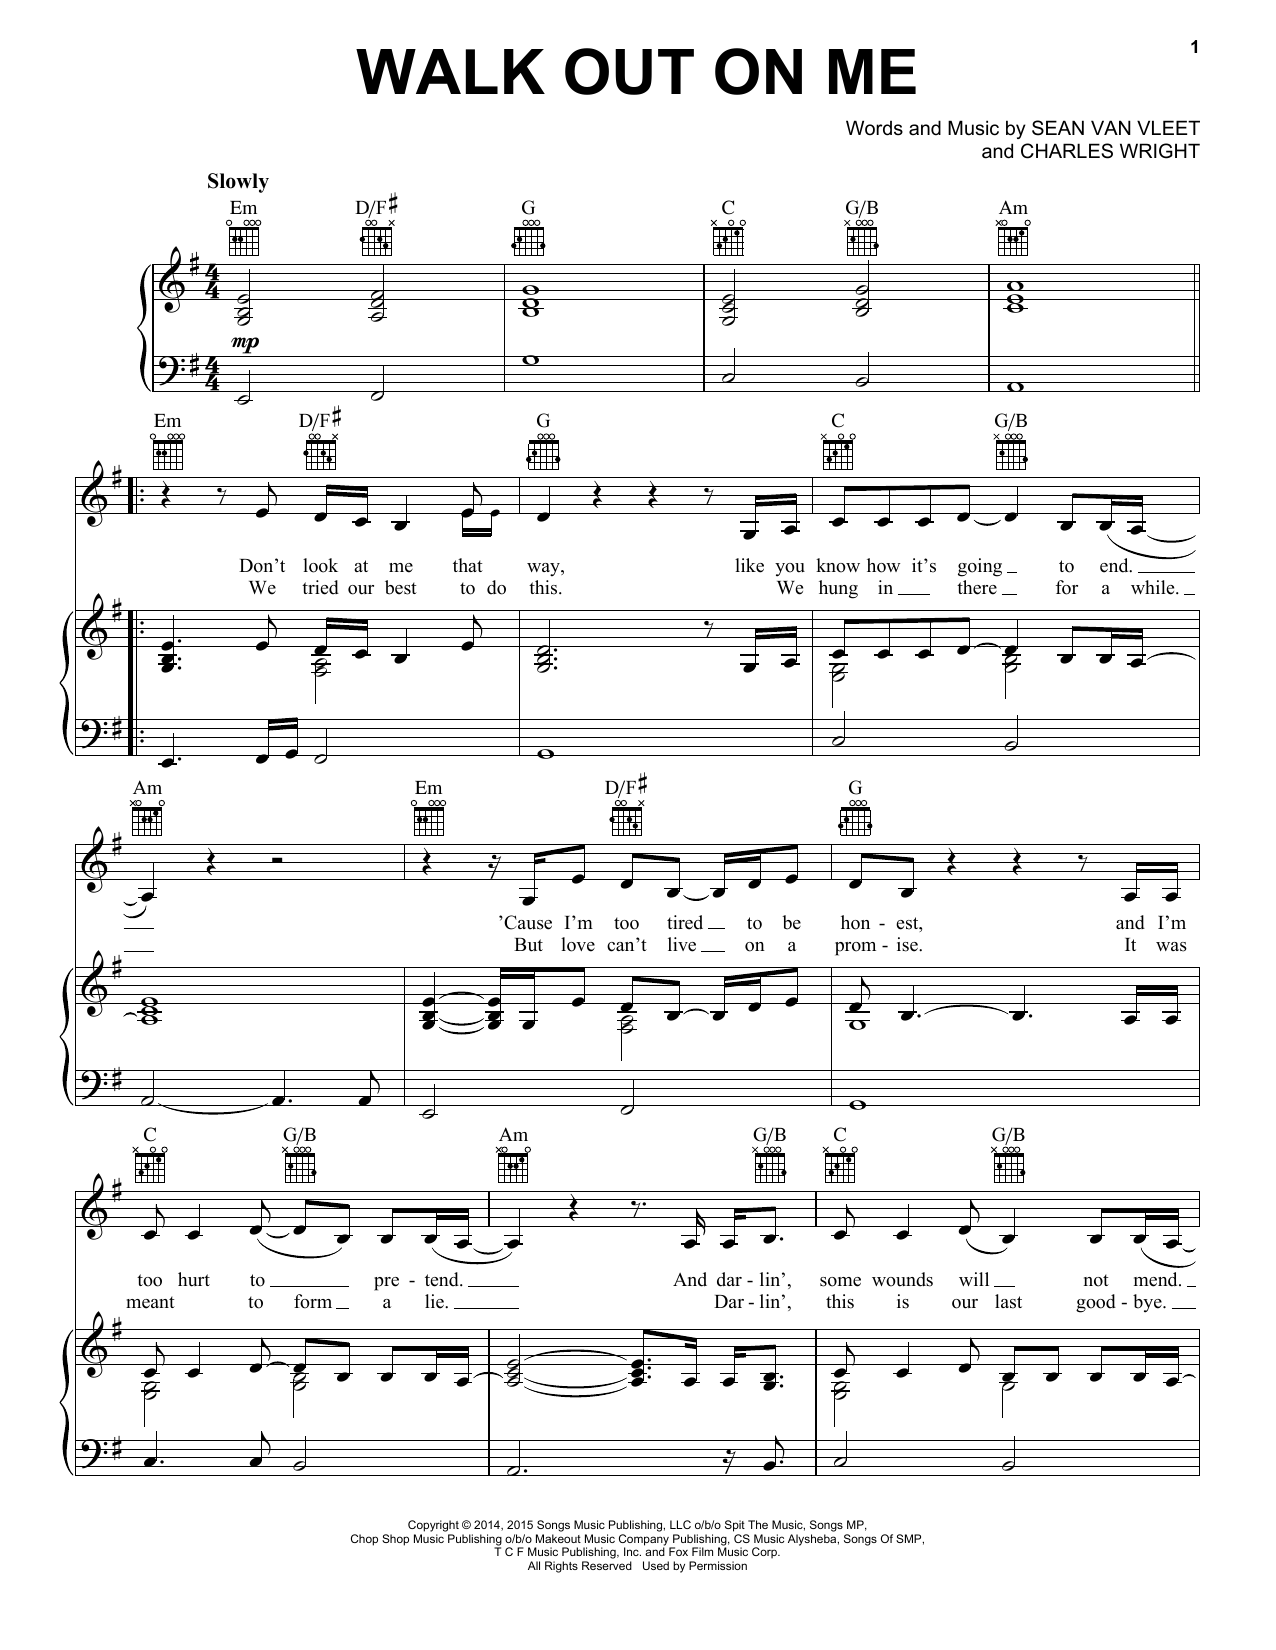 Download Elle Dallas featuring Courtney Love Walk Out On Me Sheet Music